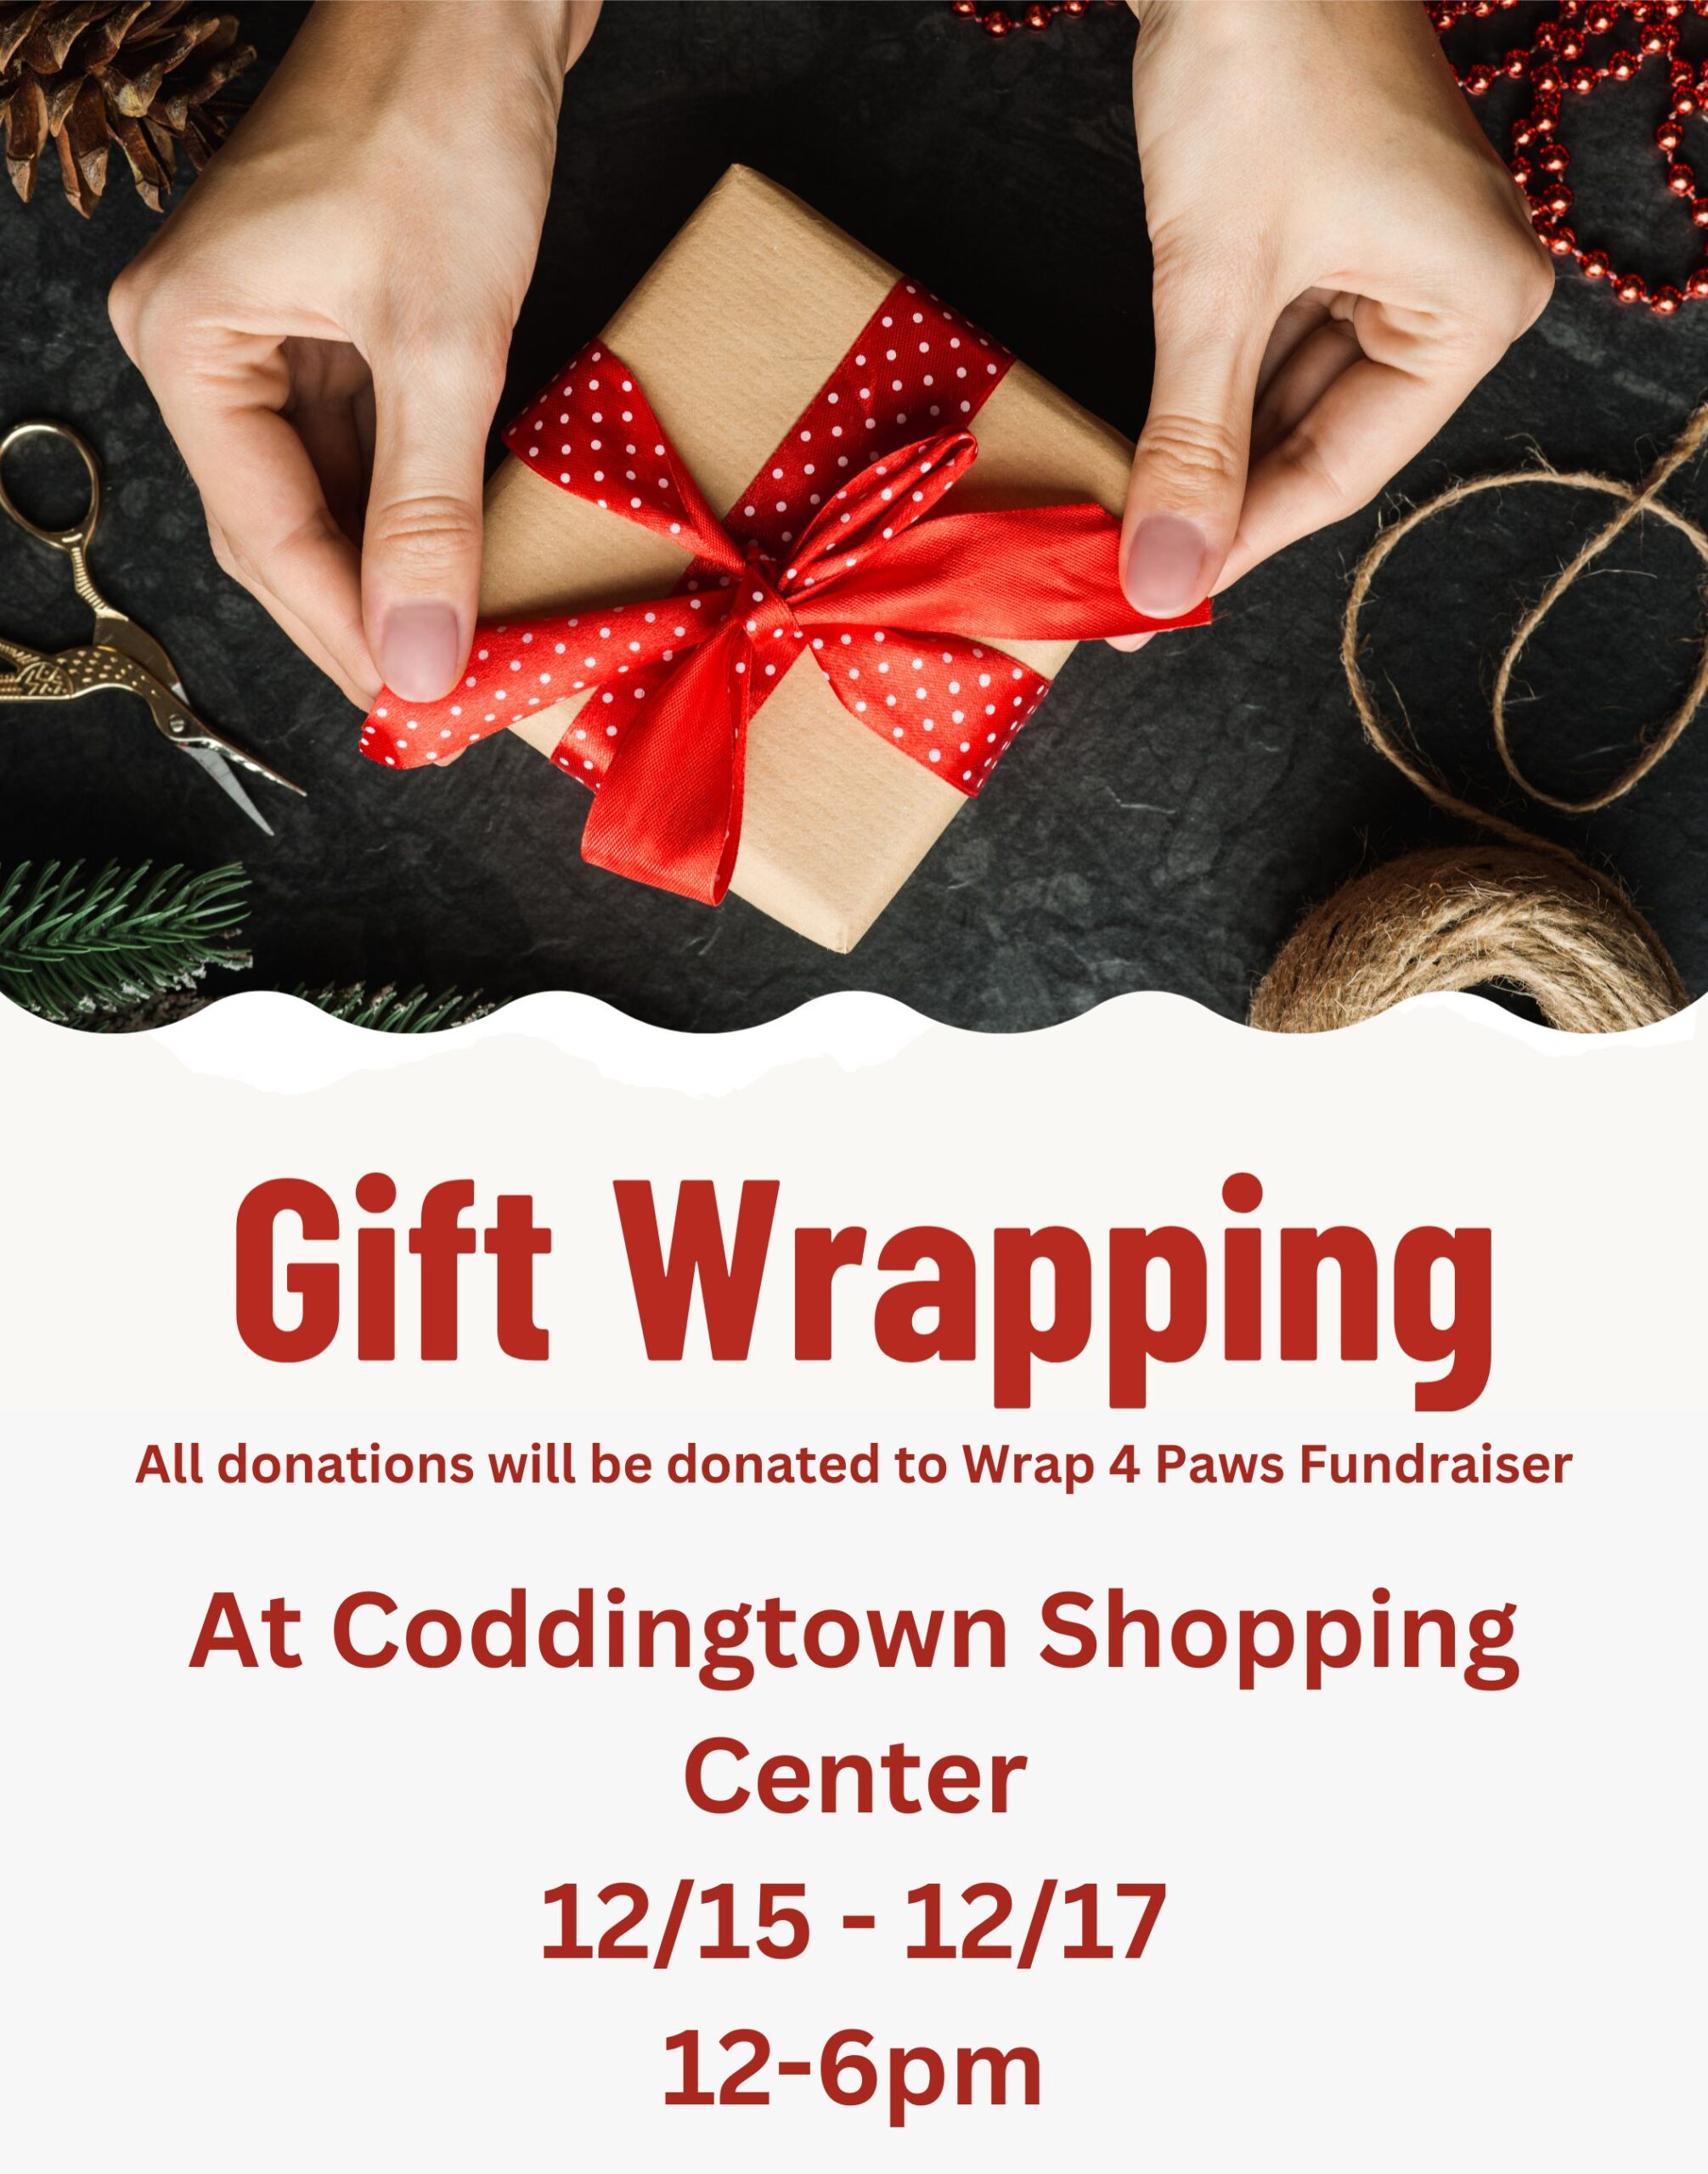 Gift Wrapping. All donations will be donated to Wrap 4 Paws Fundraiser. At Coddingtown Shopping Center 12/15 - 12/17 12-6pm